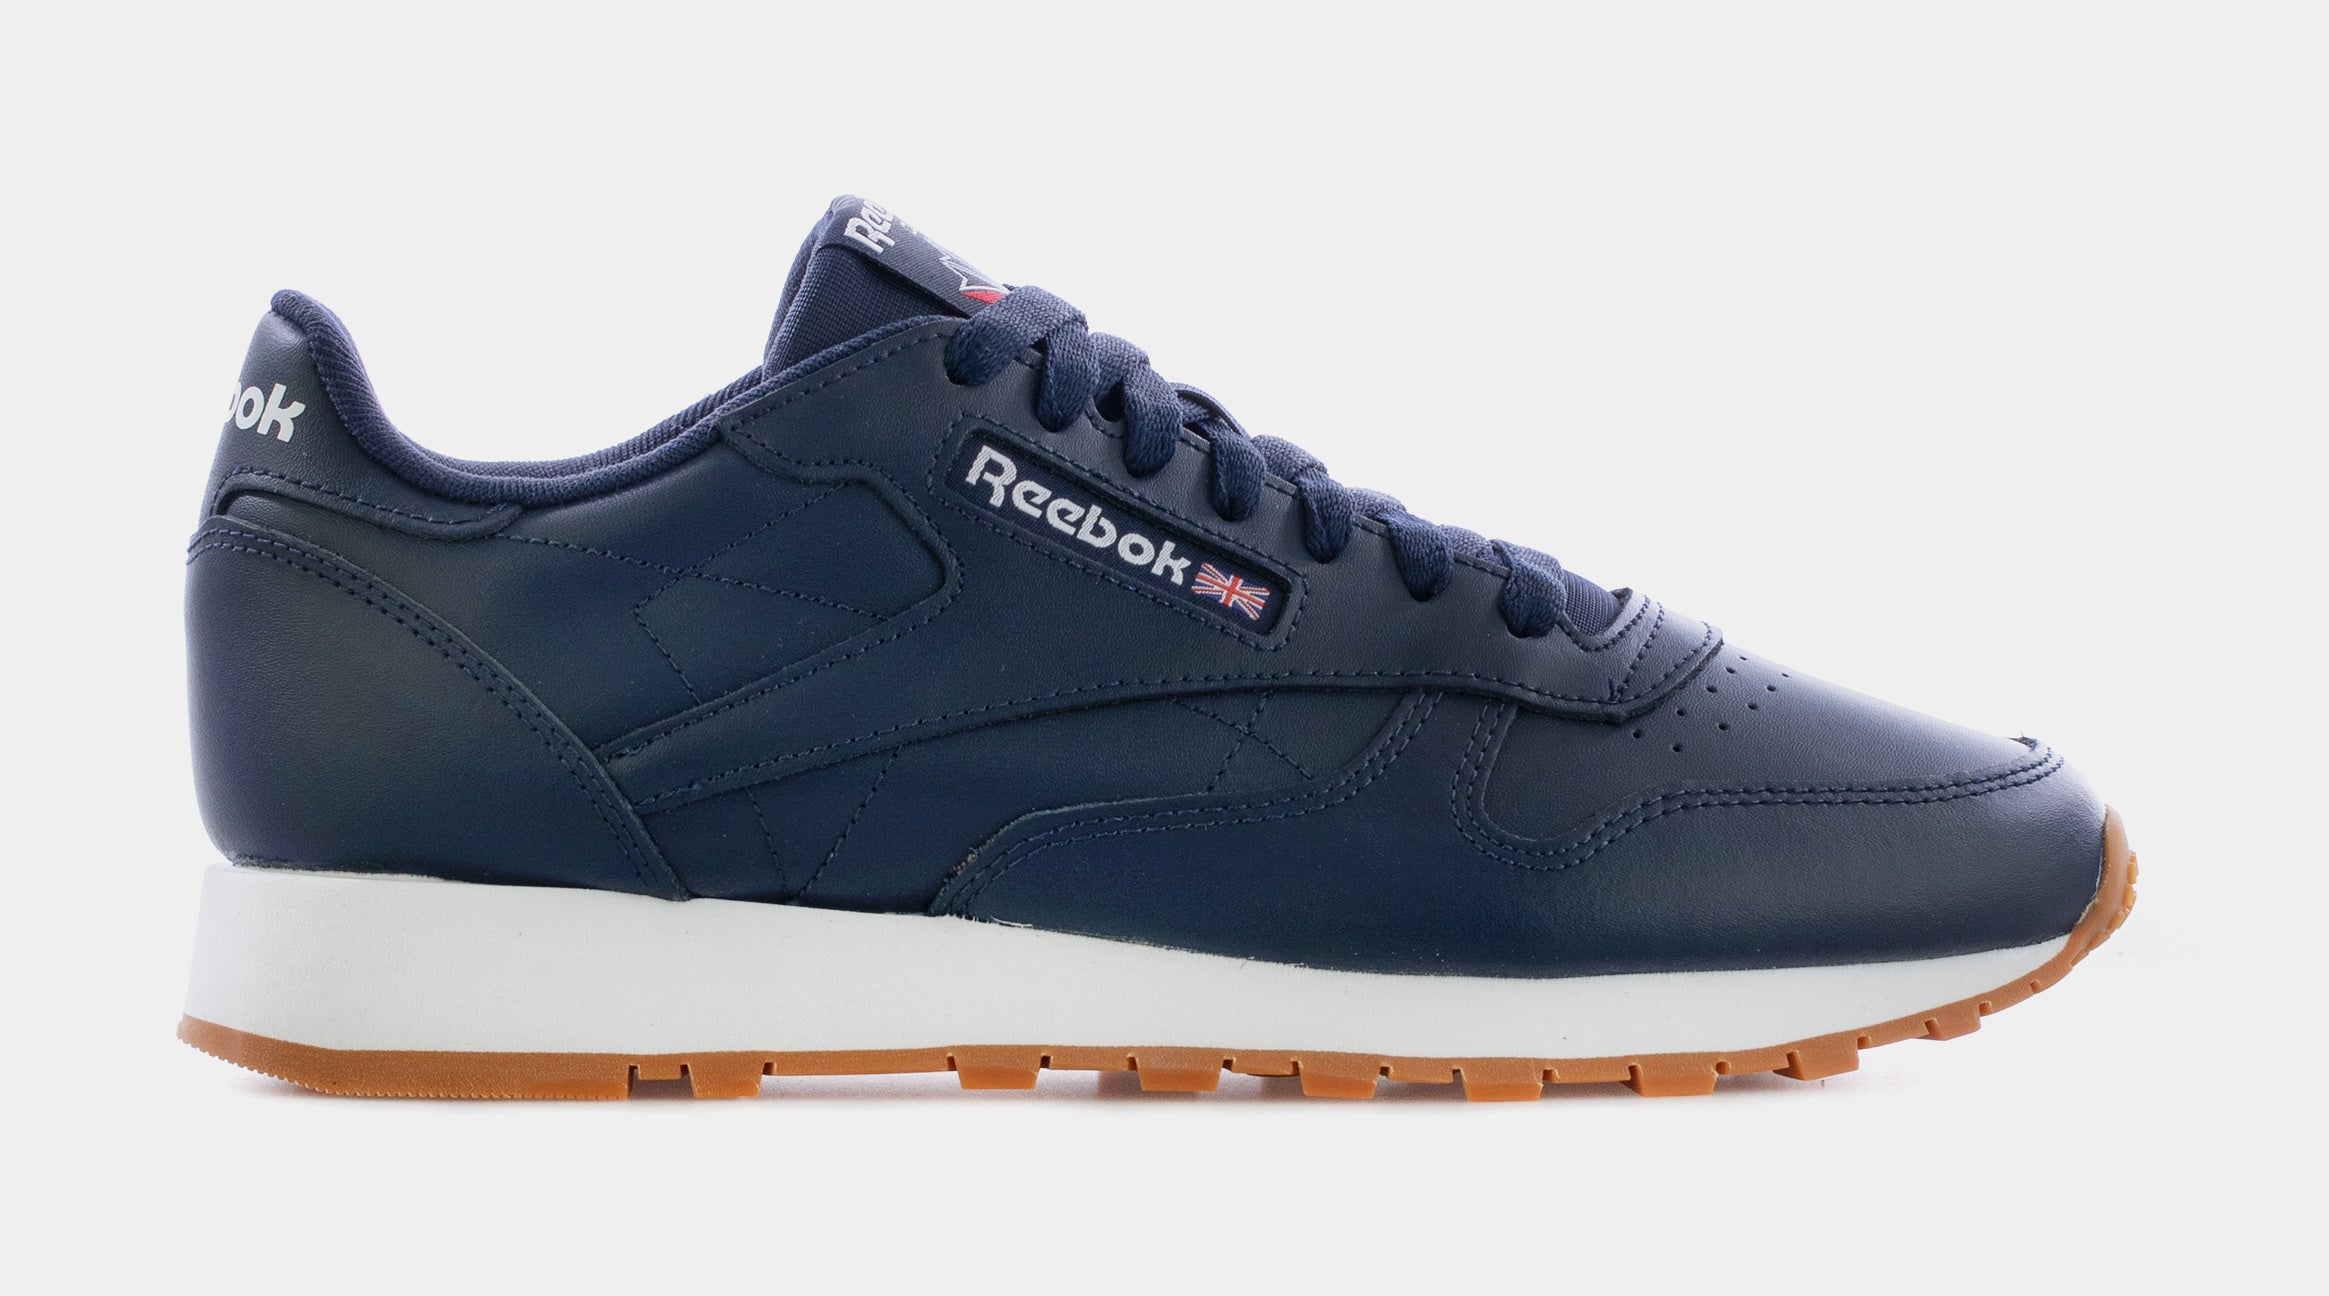 Reebok Leather Mens Lifestyle Shoes Navy Blue GY3600 – Shoe